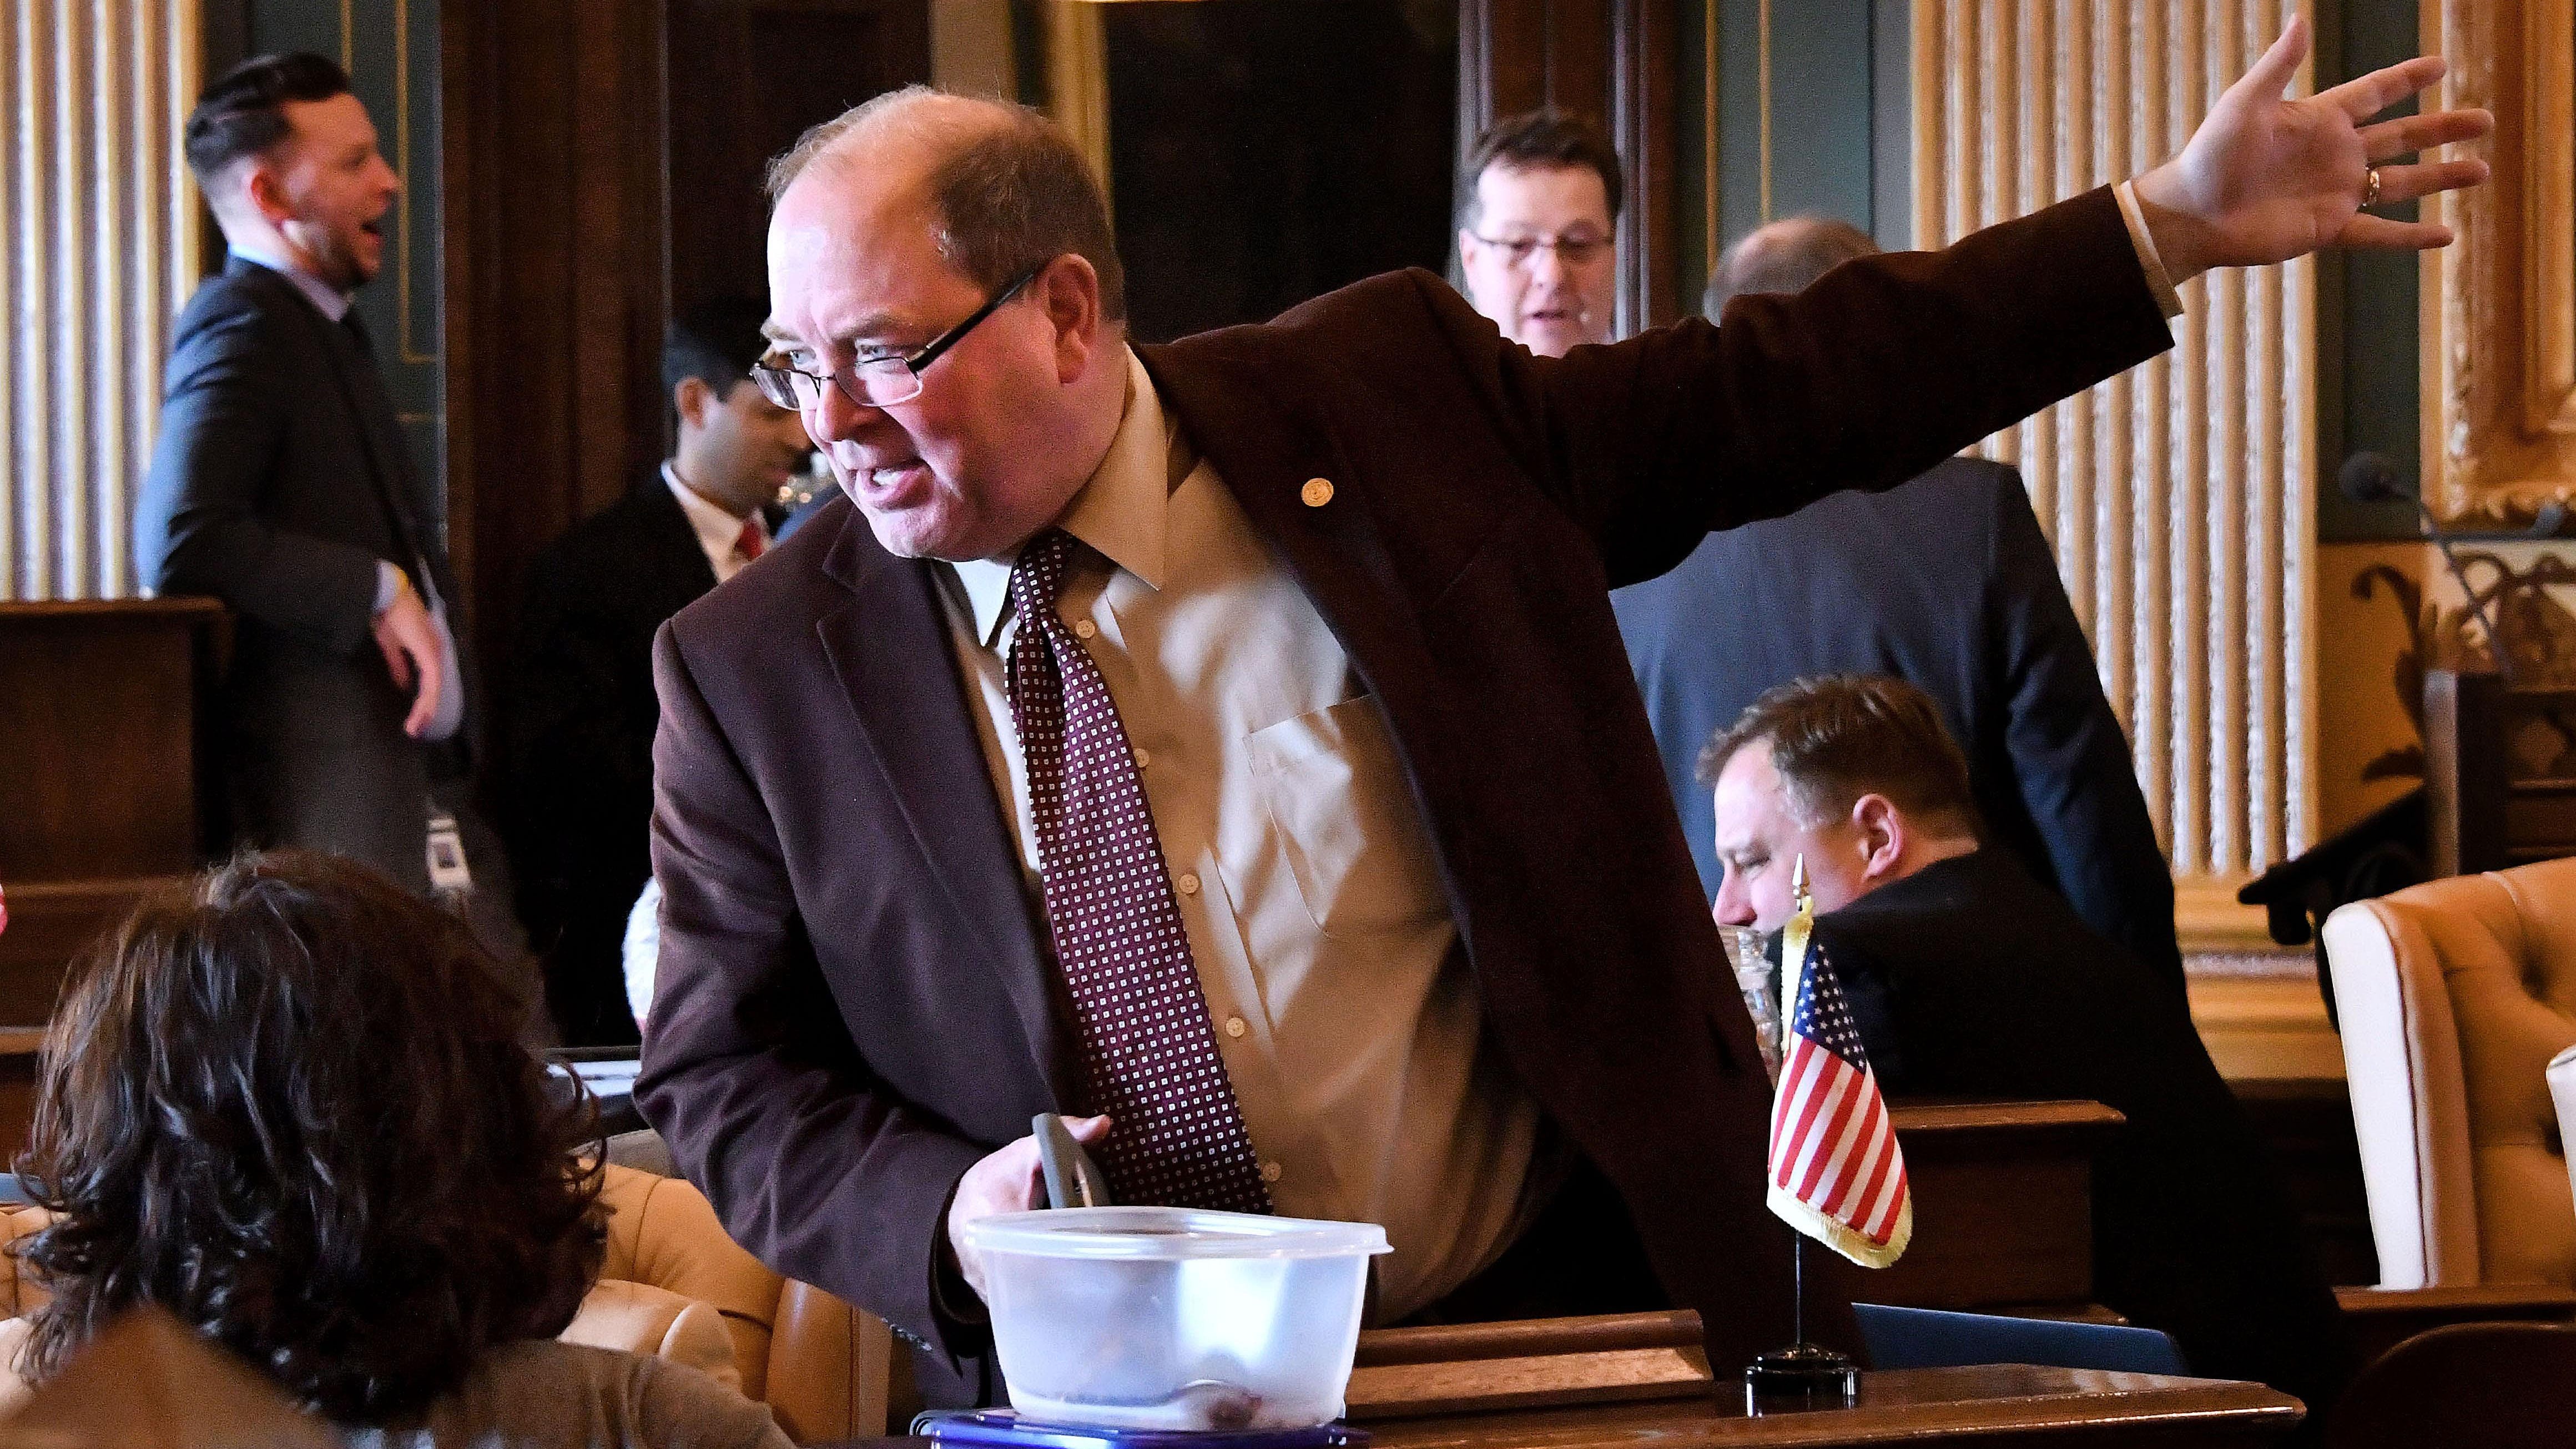 An animated Sen. David Robertson, R-Grand Blanc, waves his hands while talking with collegues as the Michigan Senate deliberated over a package of bills that would change auto fees and increase personal tax exemptions in the state on Wednesday.